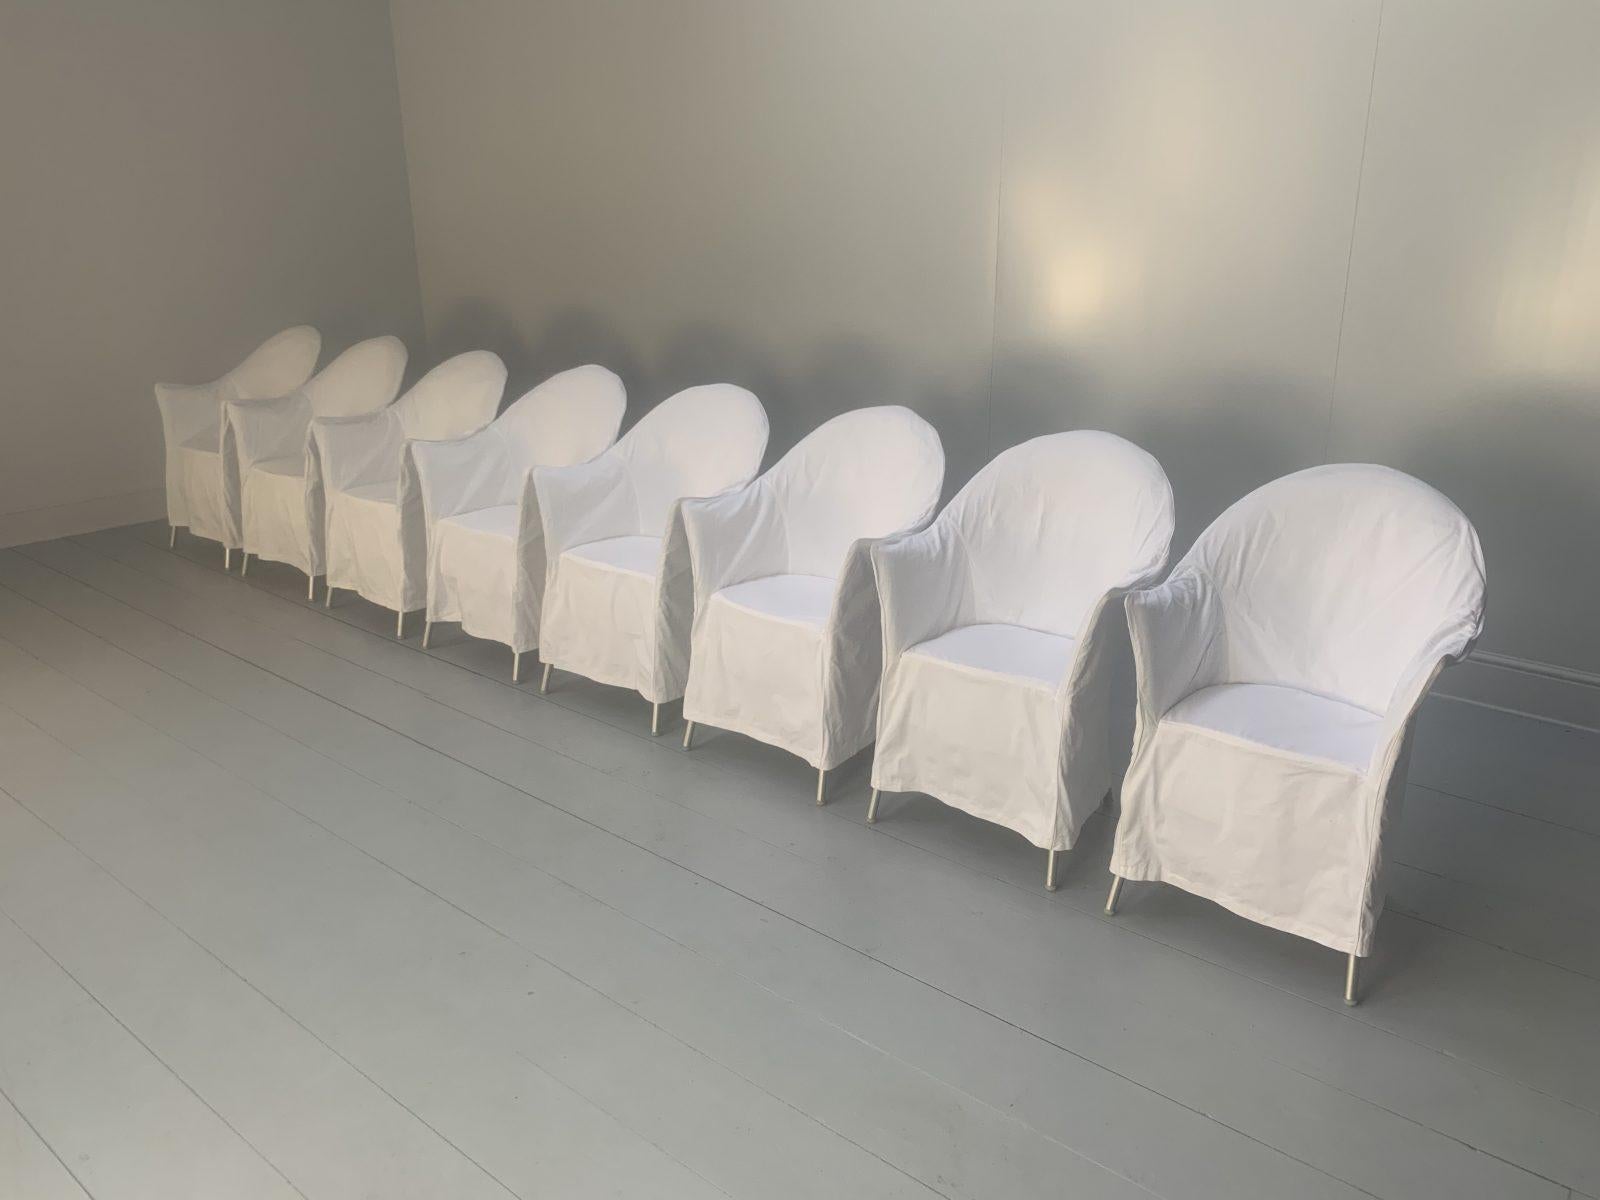 Suite of 8 Driade “Lord Yo” Outdoor Dining Chairs with White Cotton Covers In Good Condition For Sale In Barrowford, GB